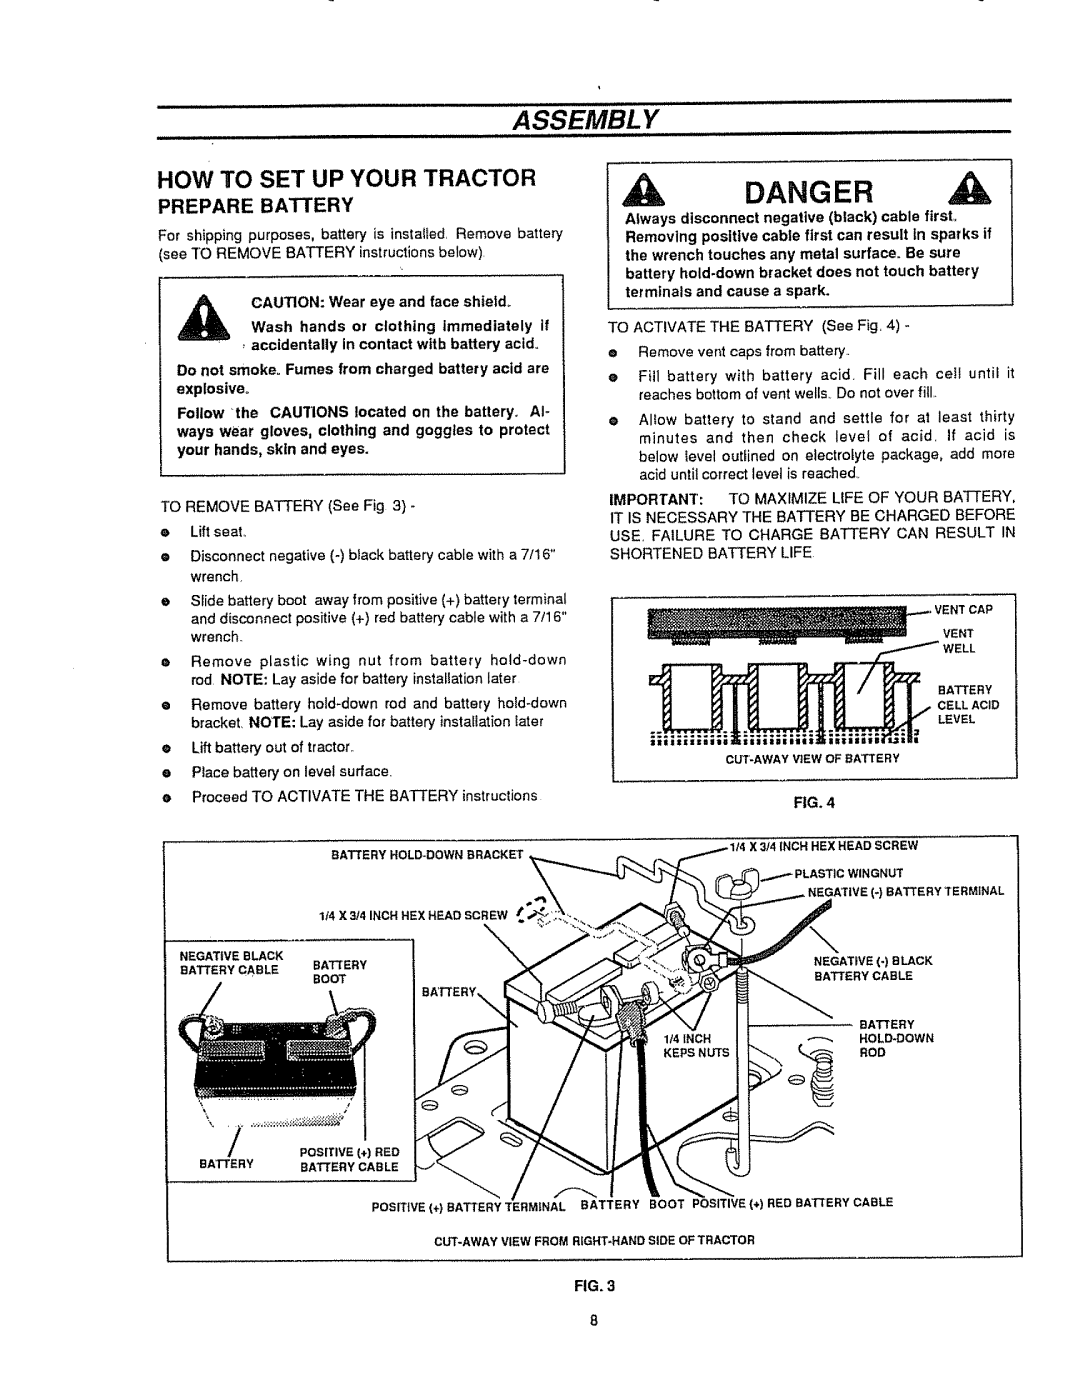 Sears 536.25587 owner manual Danger, Assembly, How To Set Up Your Tractor, Prepare Battery 